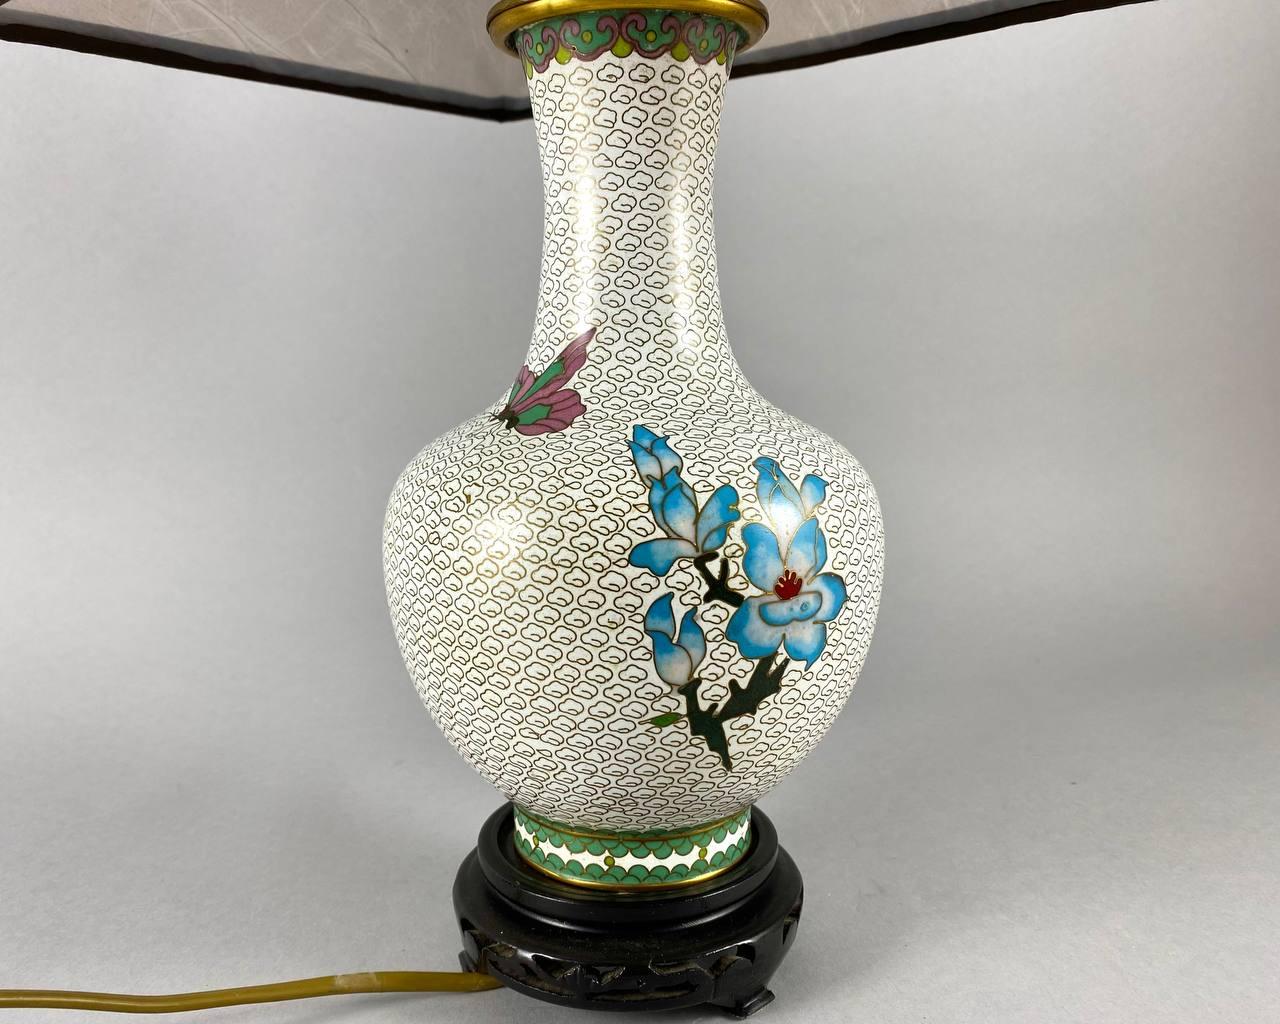 Metal Vintage Cloisonné Table Lamp with Peony Decoration, China, 1970s For Sale